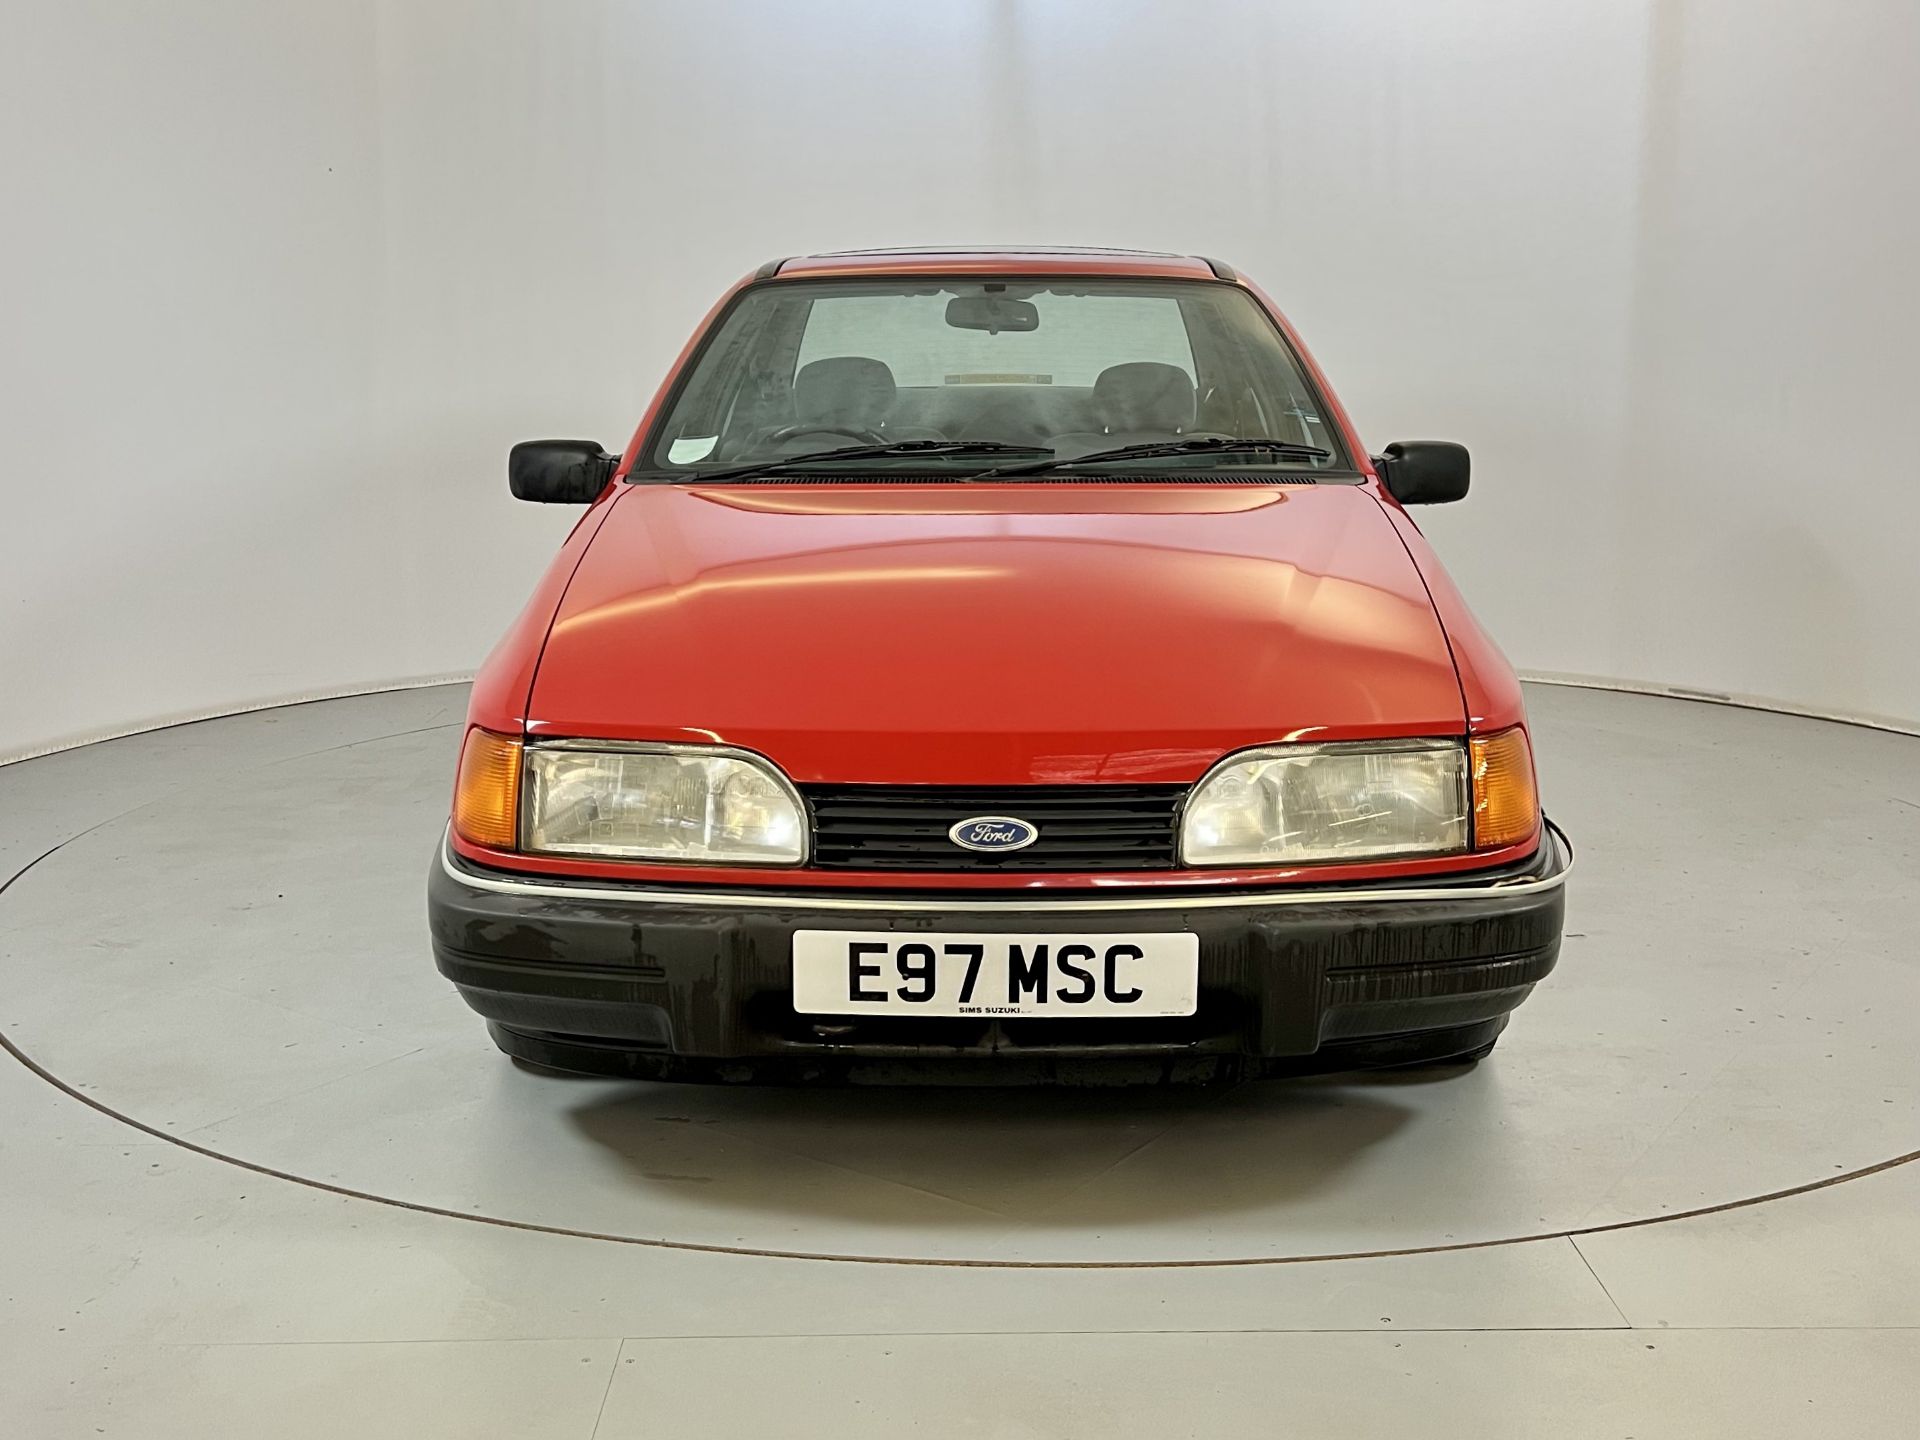 Ford Sierra Sapphire - Image 2 of 34